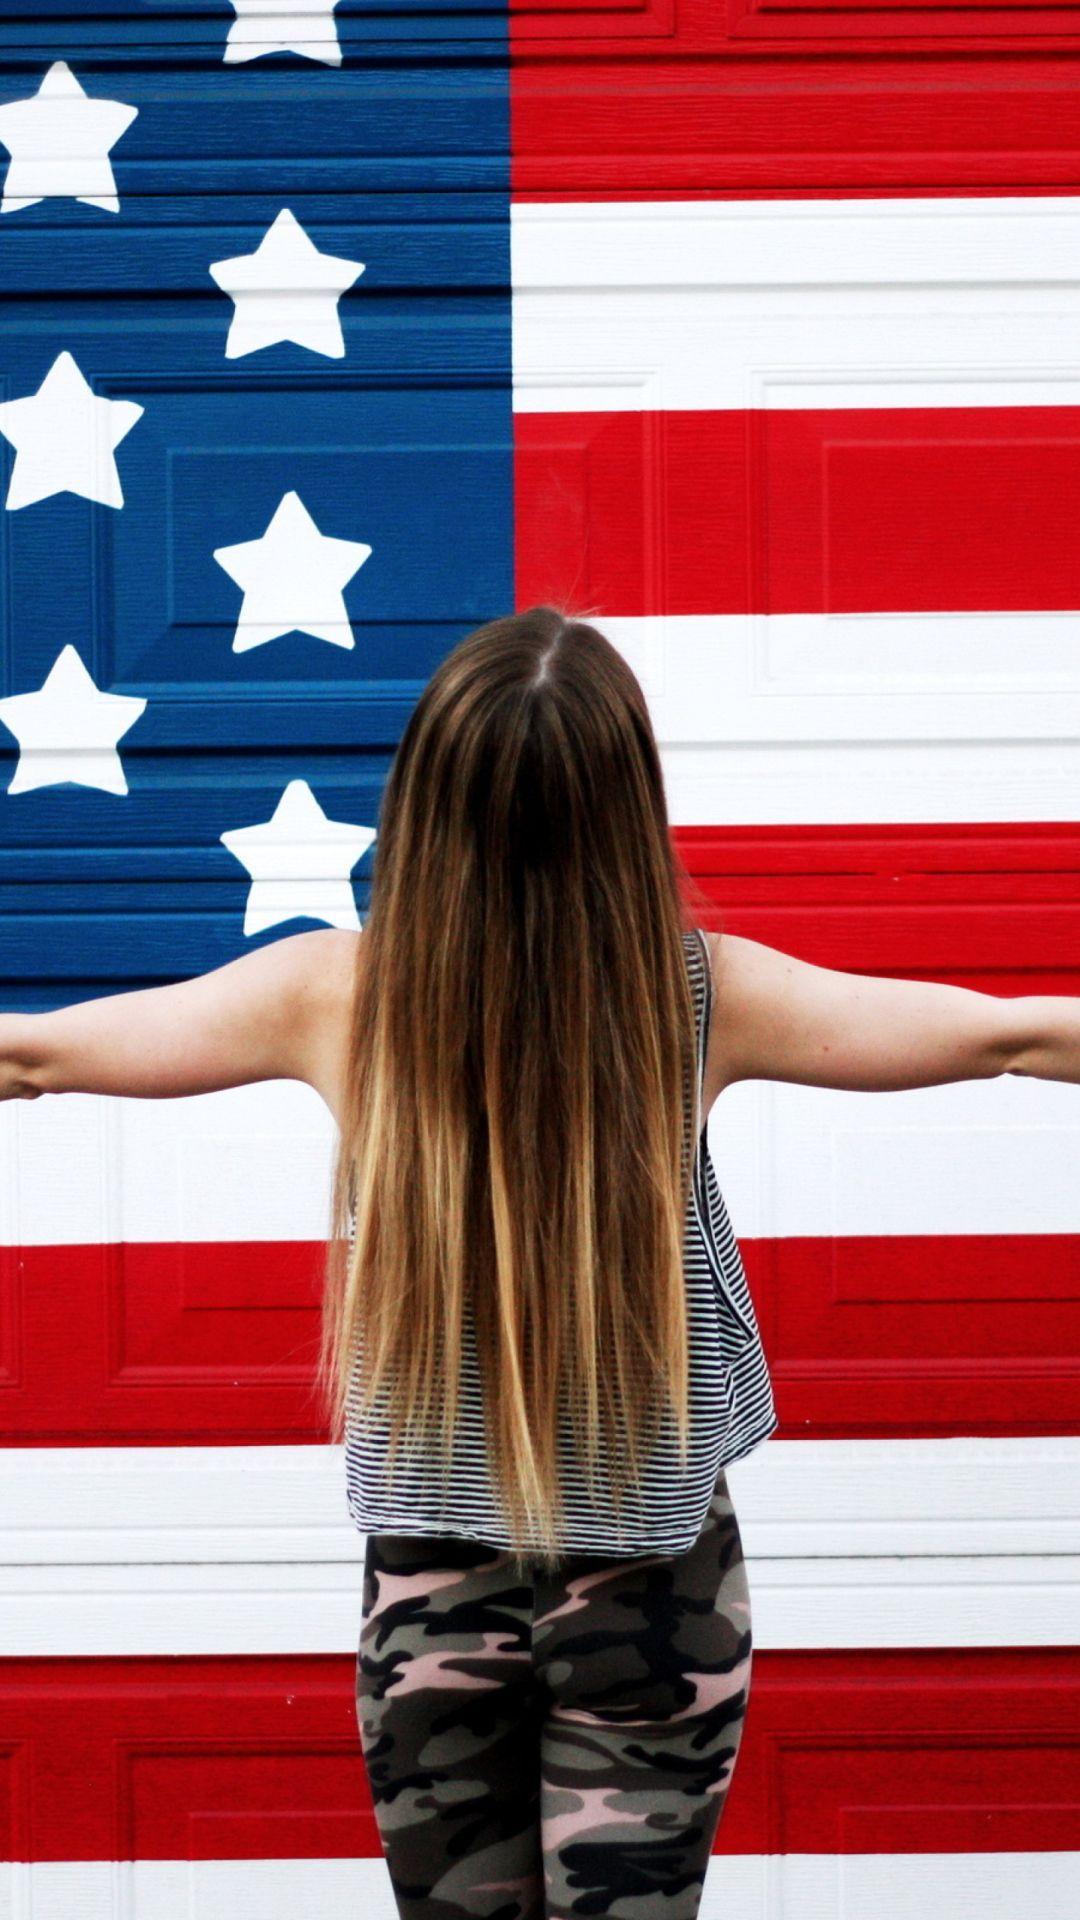 American Girl In Front Of USA Flag. USA. American